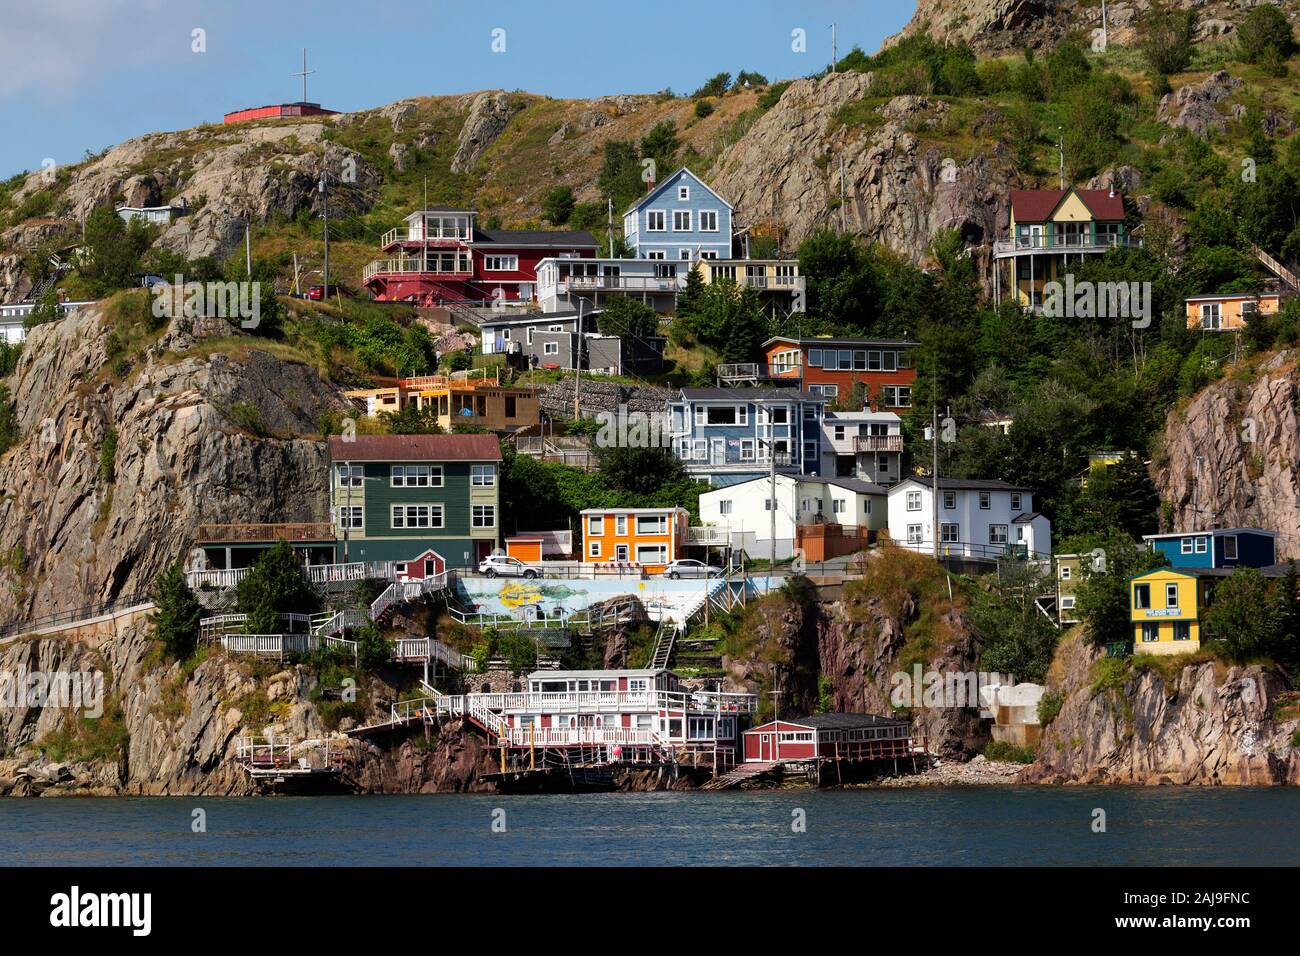 Houses overlook the harbour at St John's, Newfoundland and Labrador, Canada. The flowers are blooming in summertime. Stock Photo